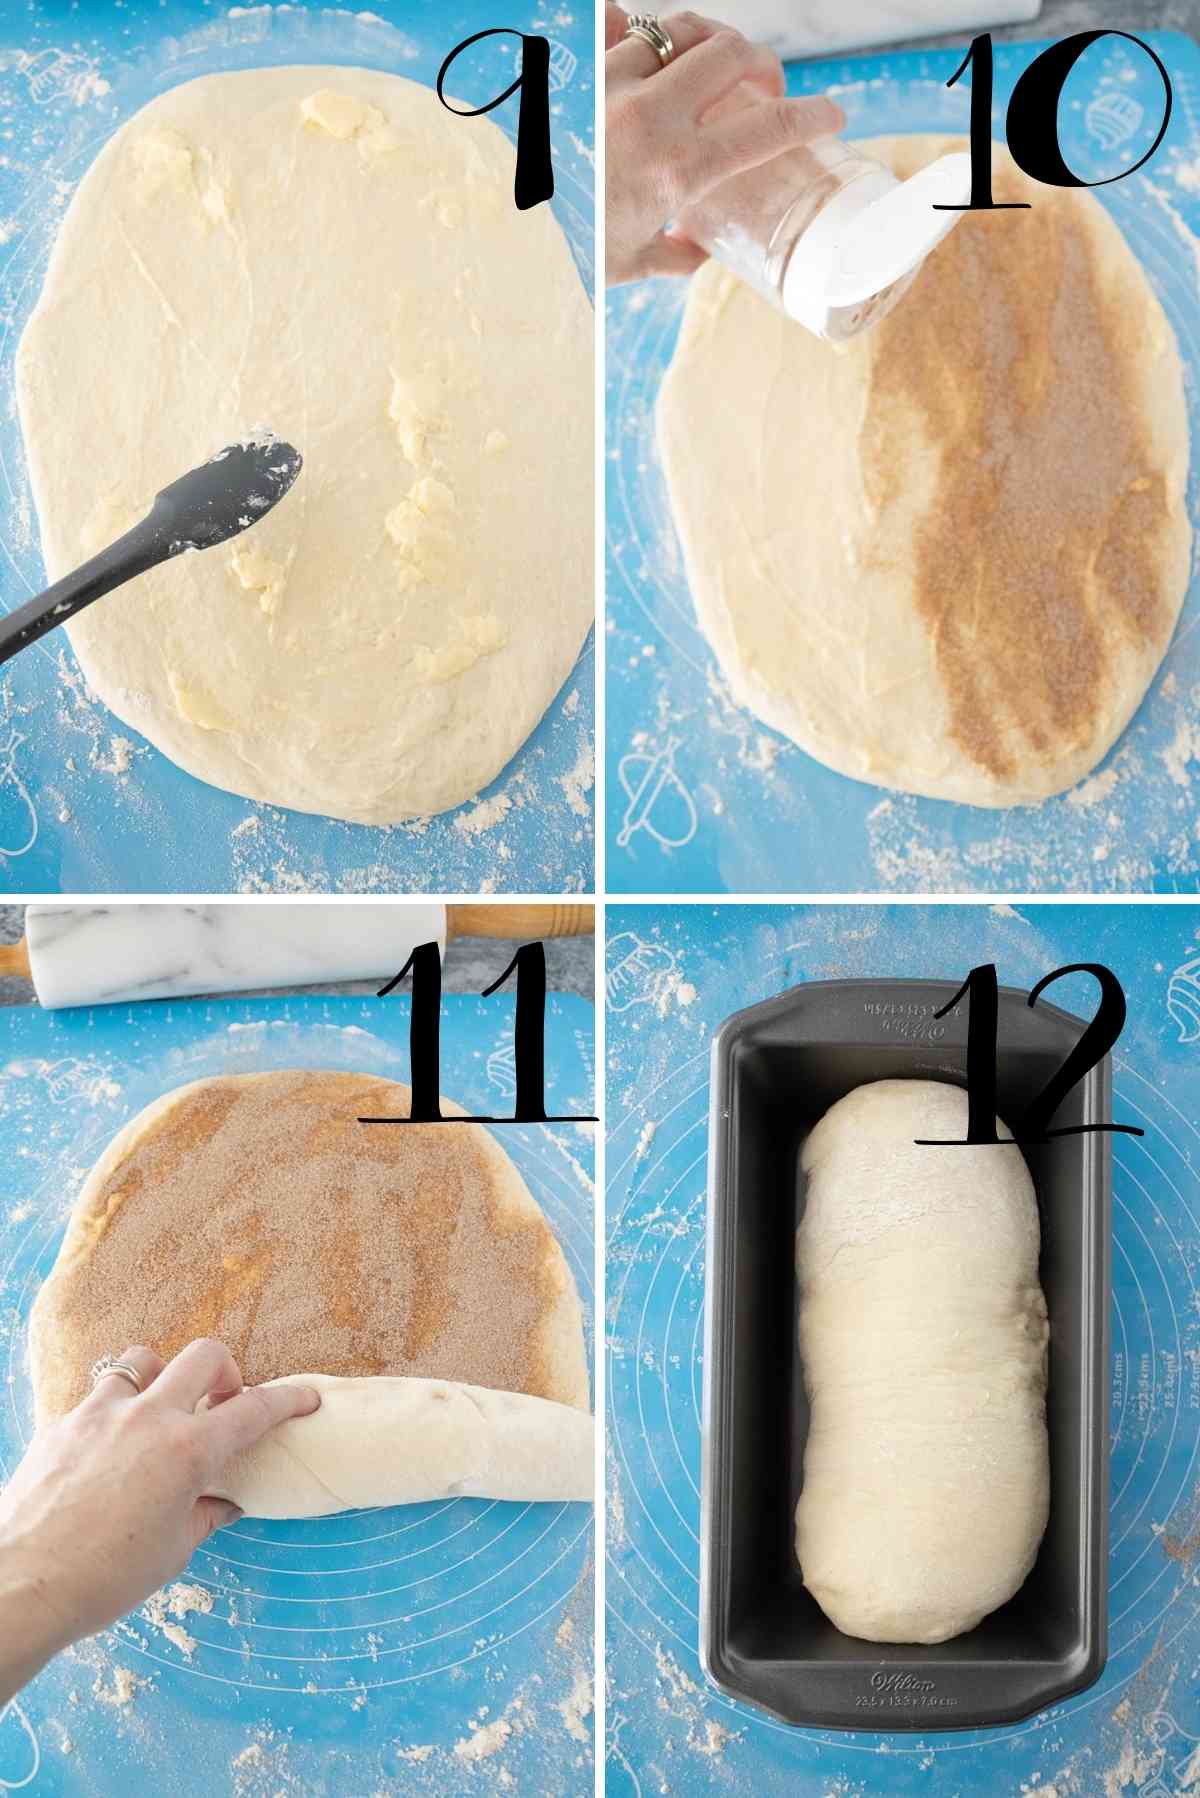 Roll out risen dough into a rectangle.  Spread with butter.  Sprinkle with cinnamon sugar.  Roll up.